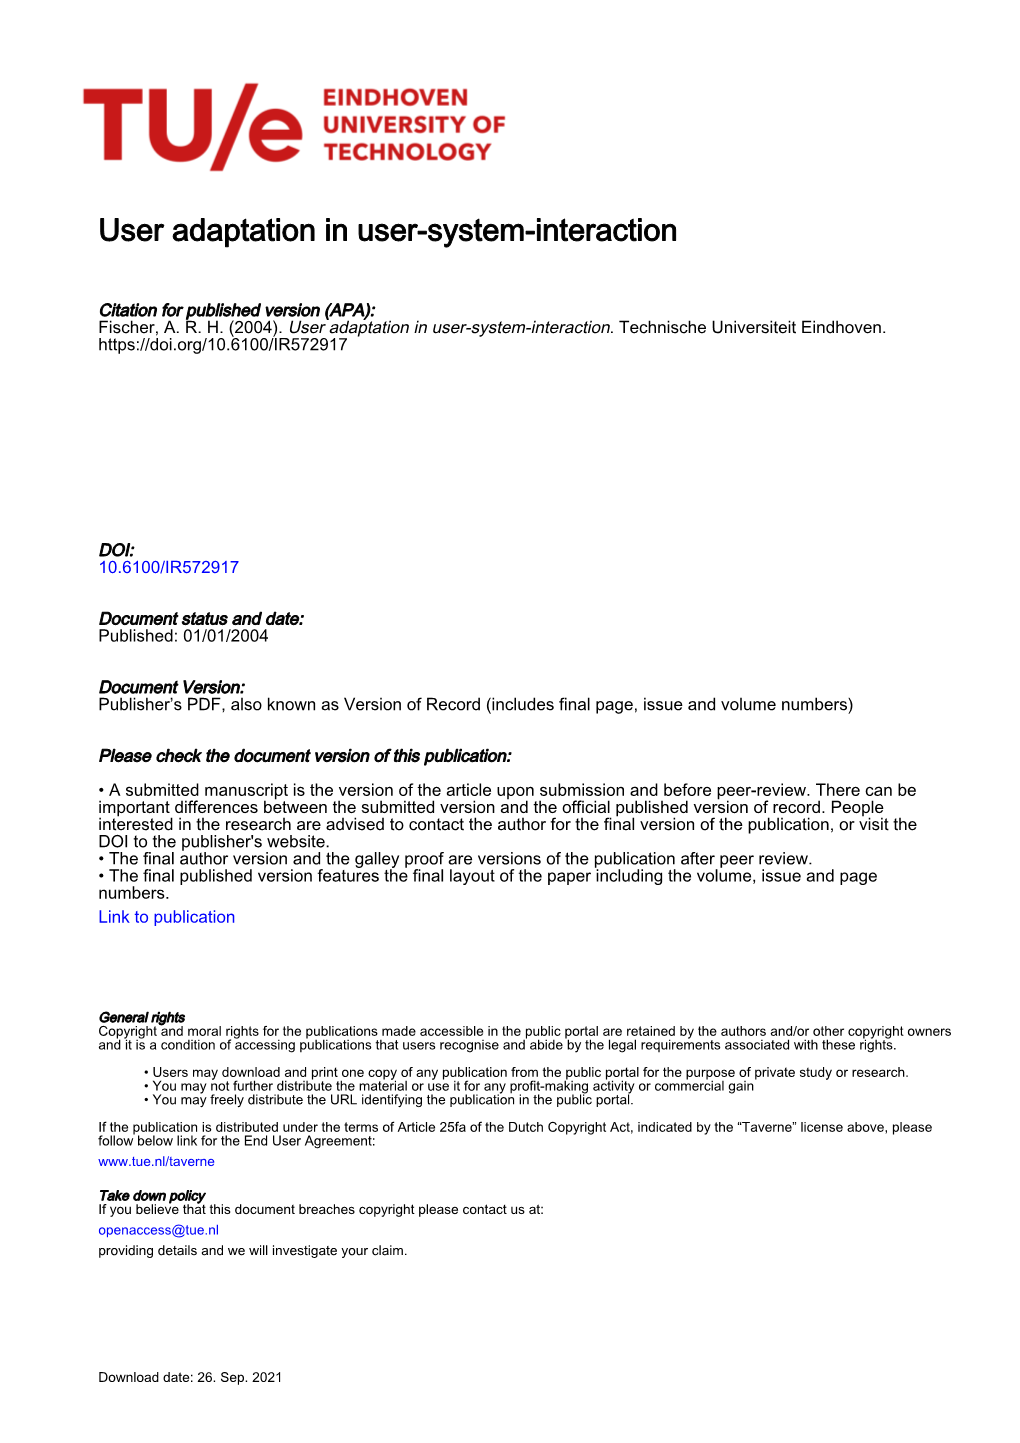 User Adaptation in User-System-Interaction